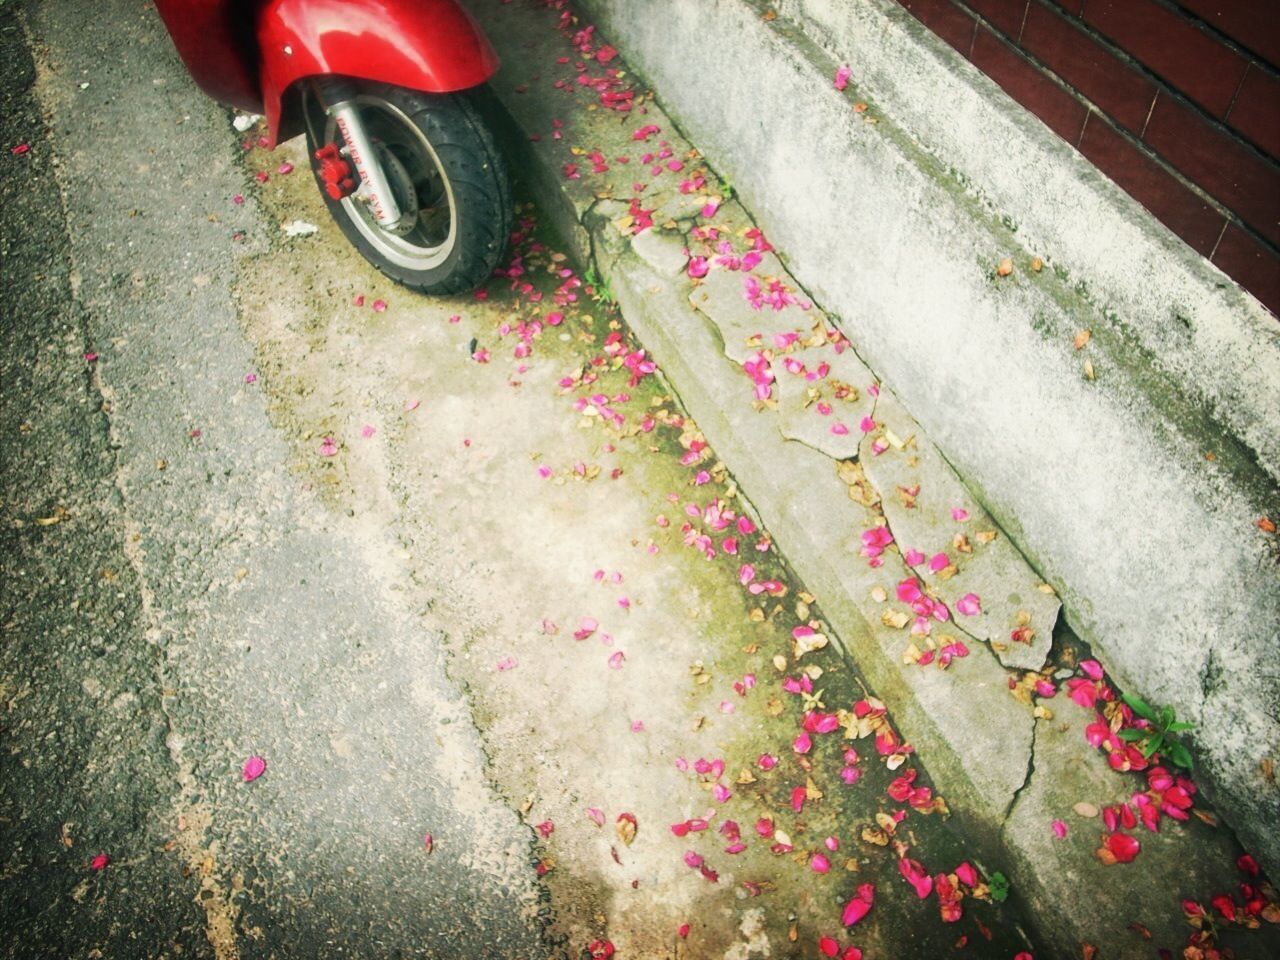 high angle view, transportation, red, street, mode of transport, outdoors, land vehicle, day, no people, sunlight, pink color, sidewalk, stationary, car, close-up, road, abandoned, asphalt, ground, wheel